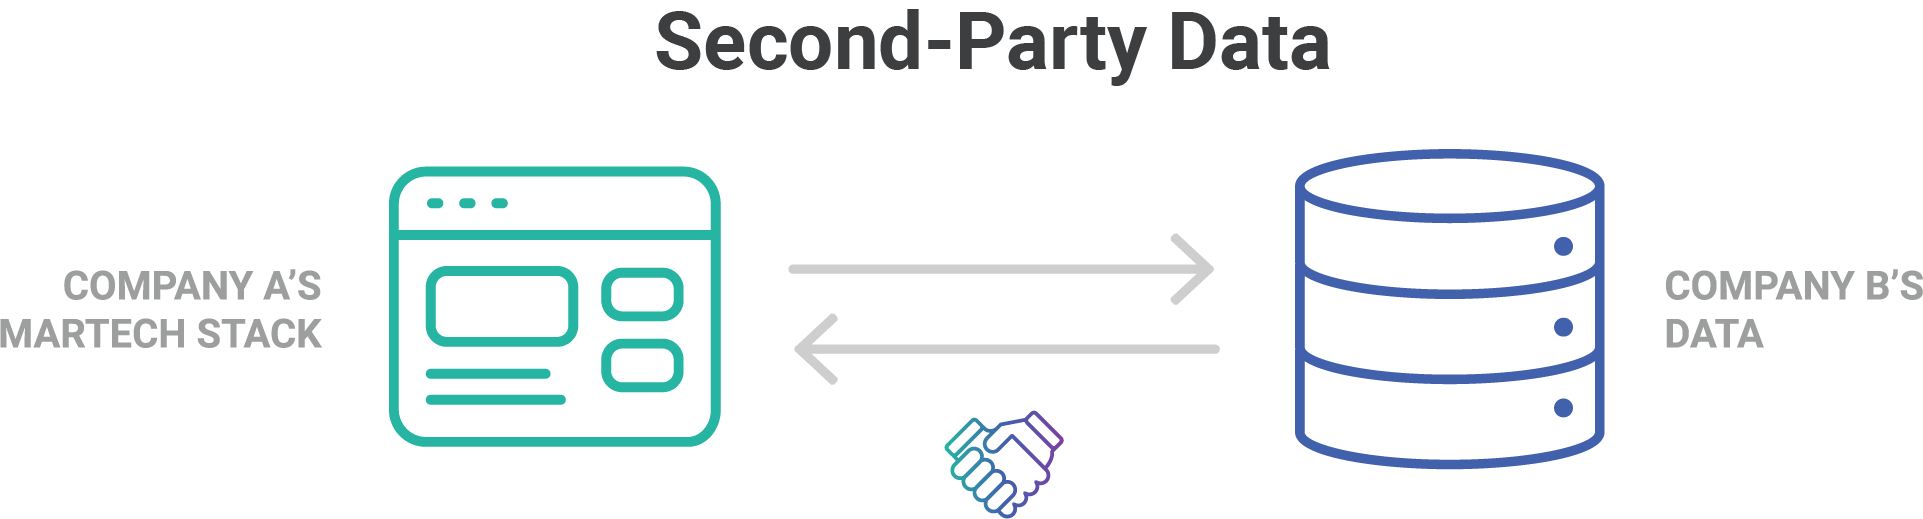 second-party data